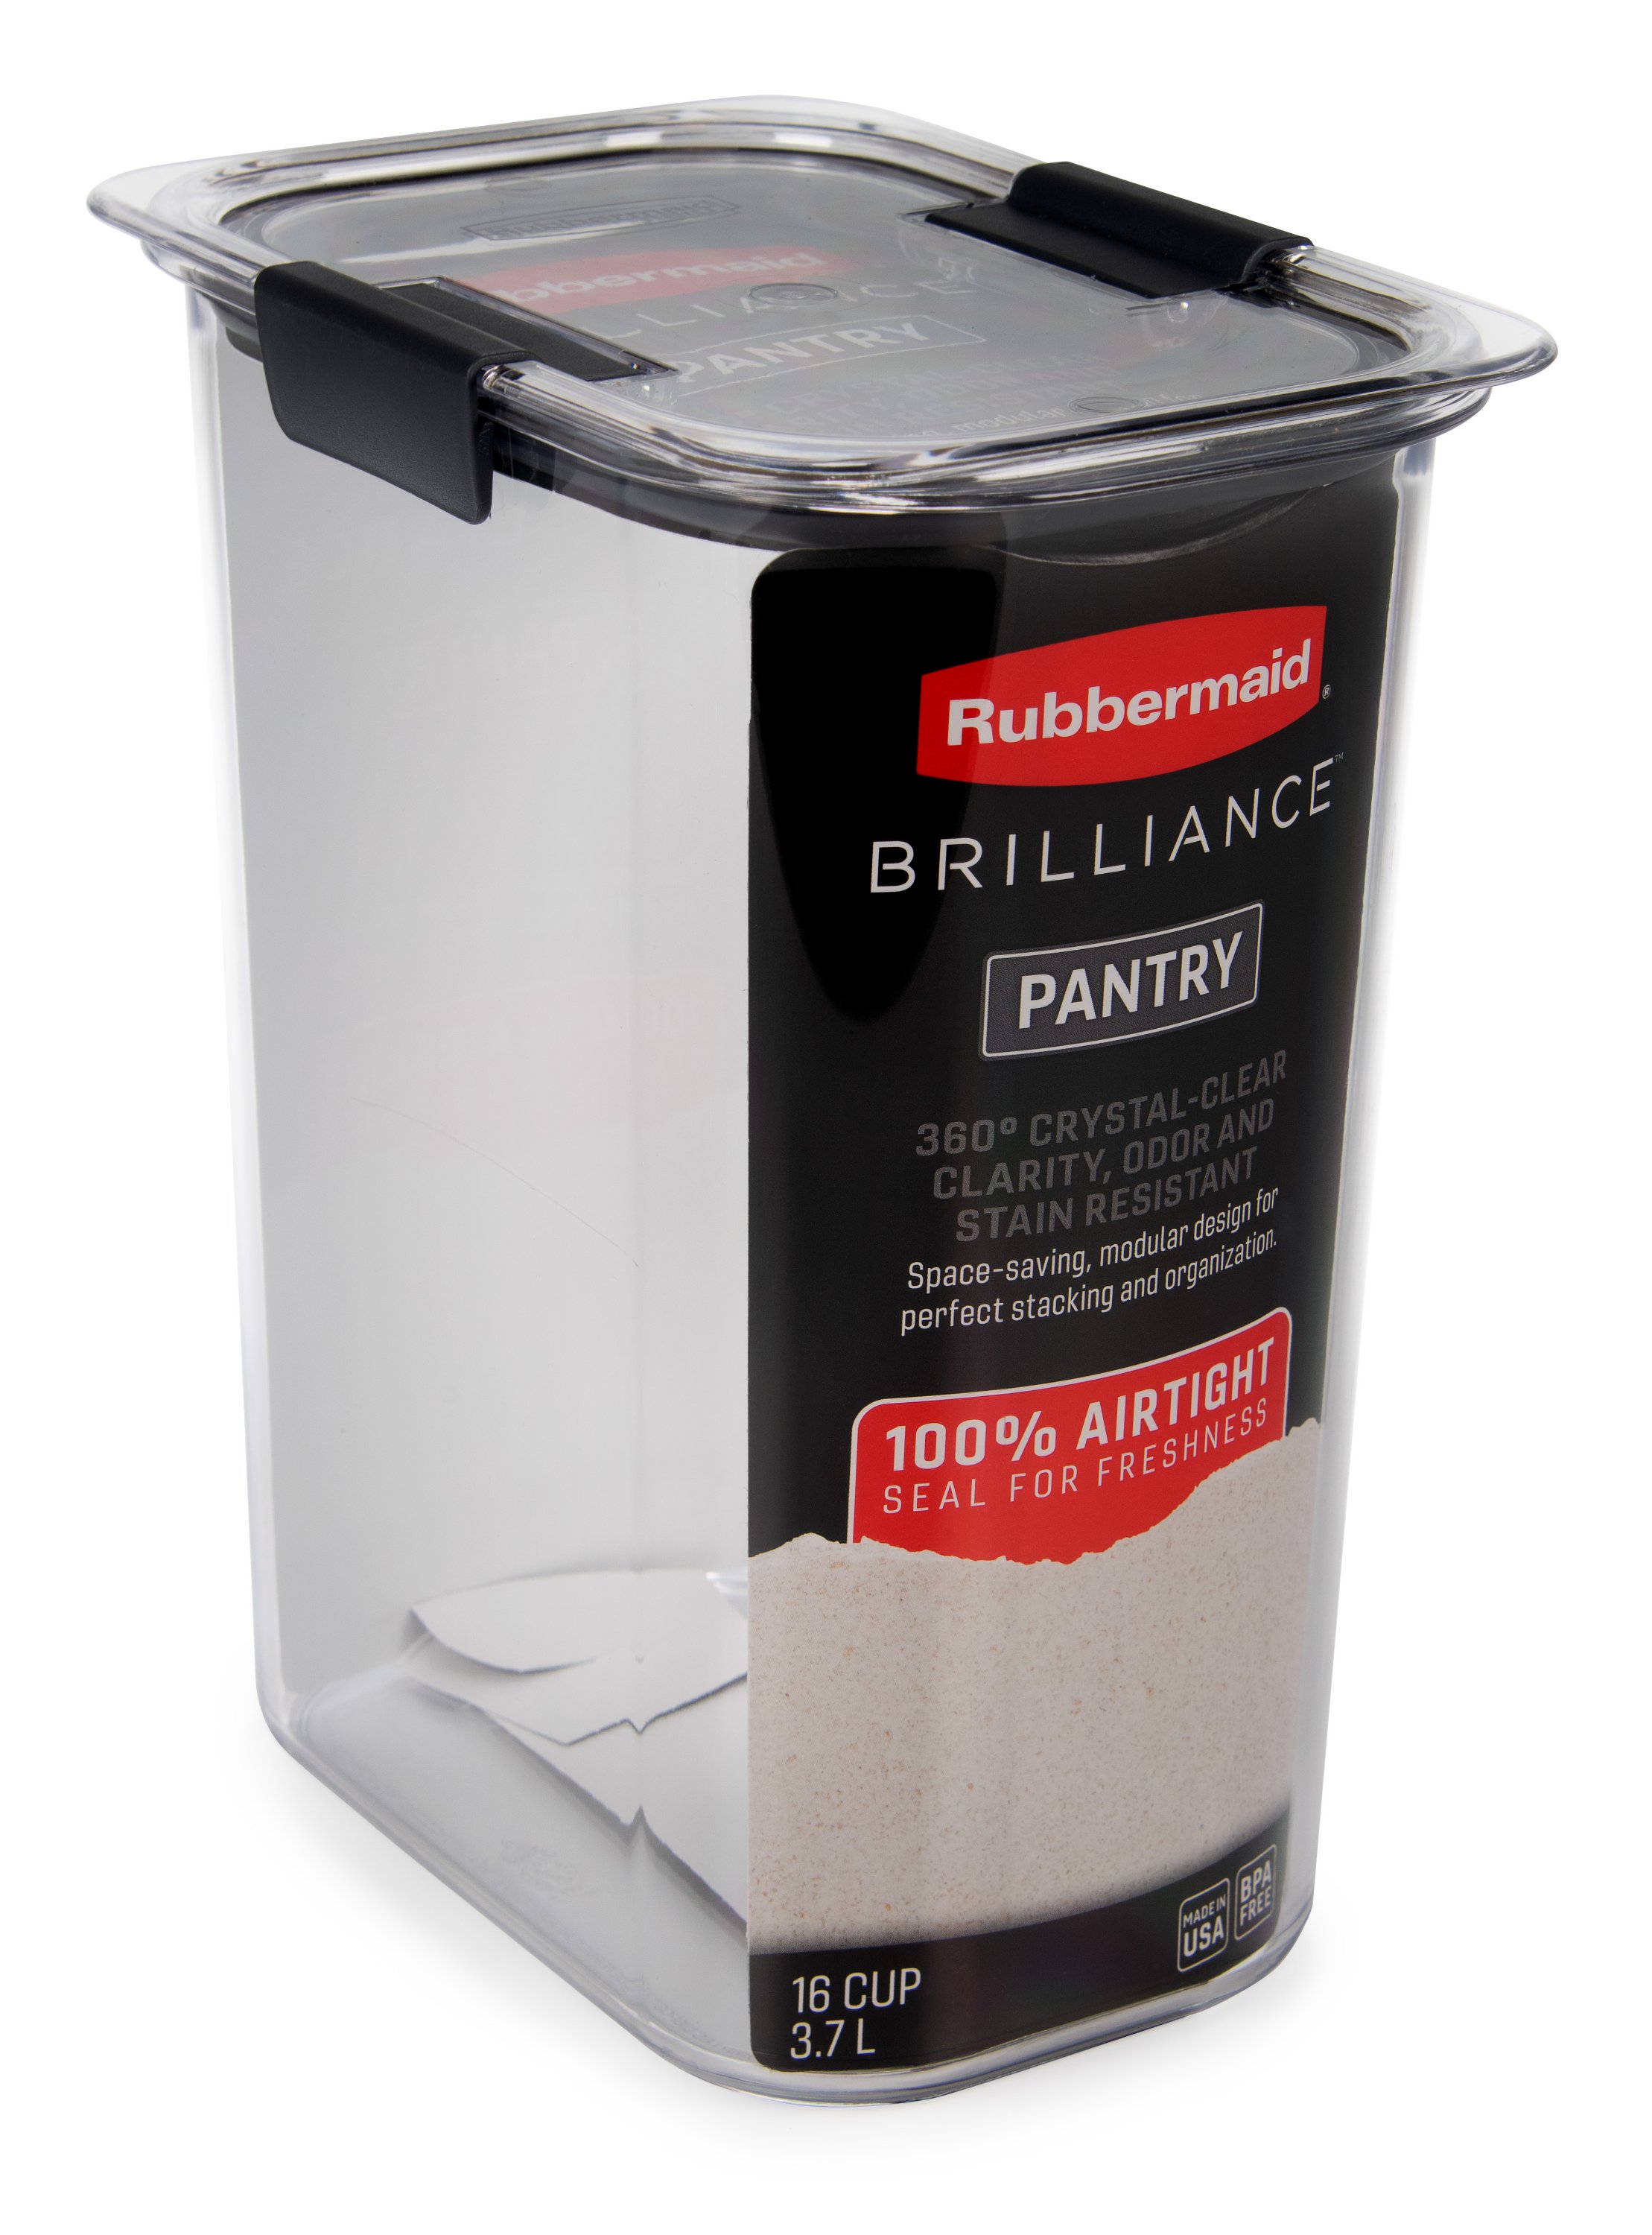 Rubbermaid 8 Cup/1.9 Liter Large Brilliance Glass : Target